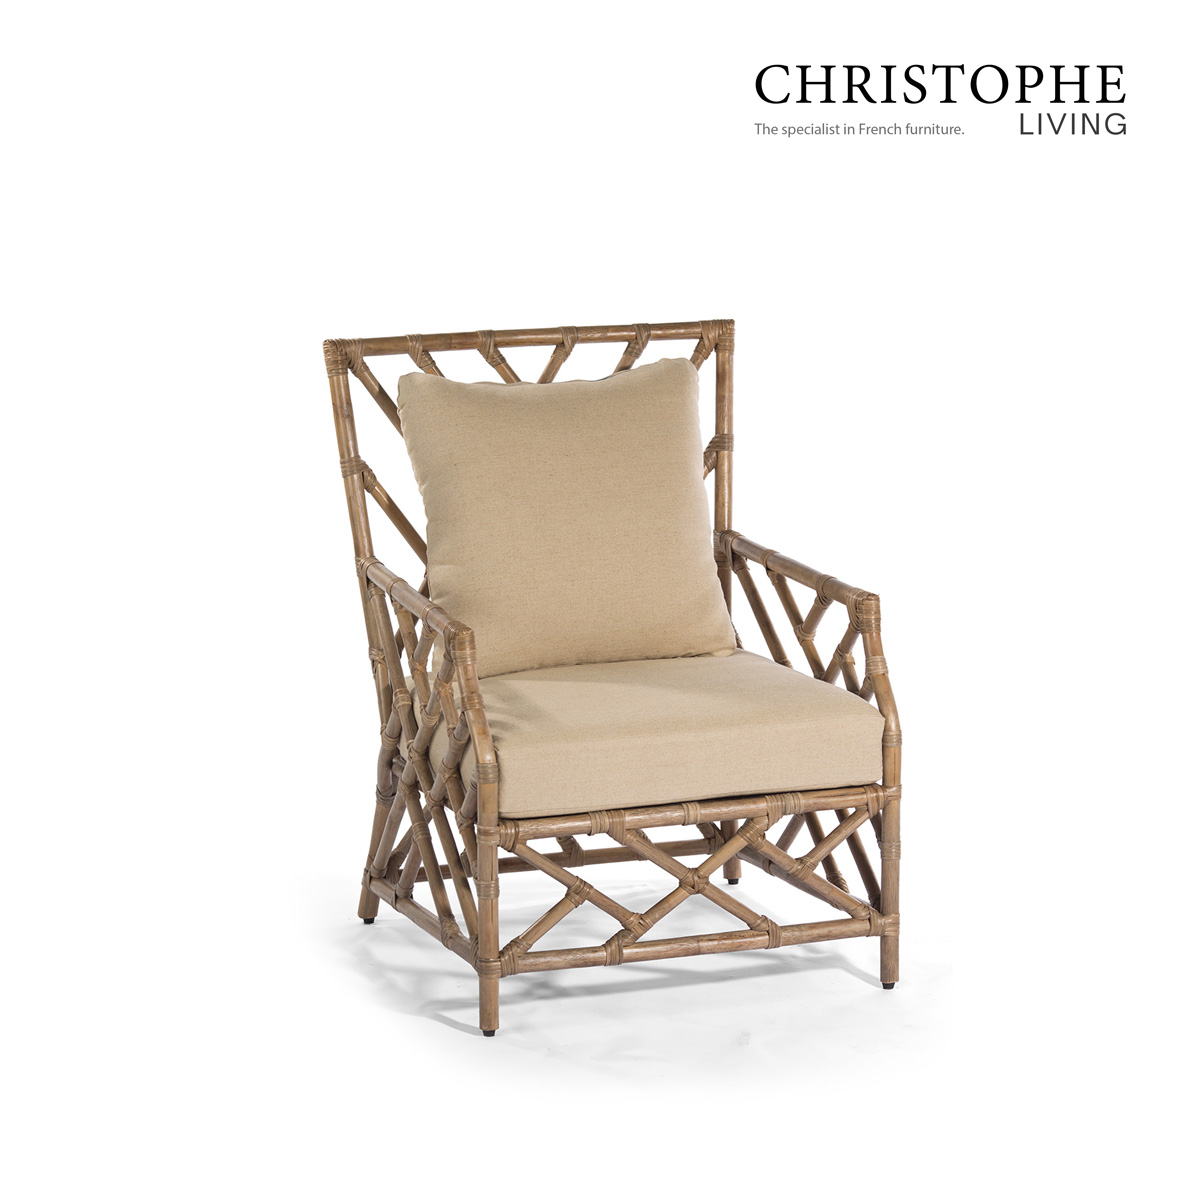 Qing Handcrafted Natural Rattan Lounge Chair in Mud Grey with Herringbone Weave